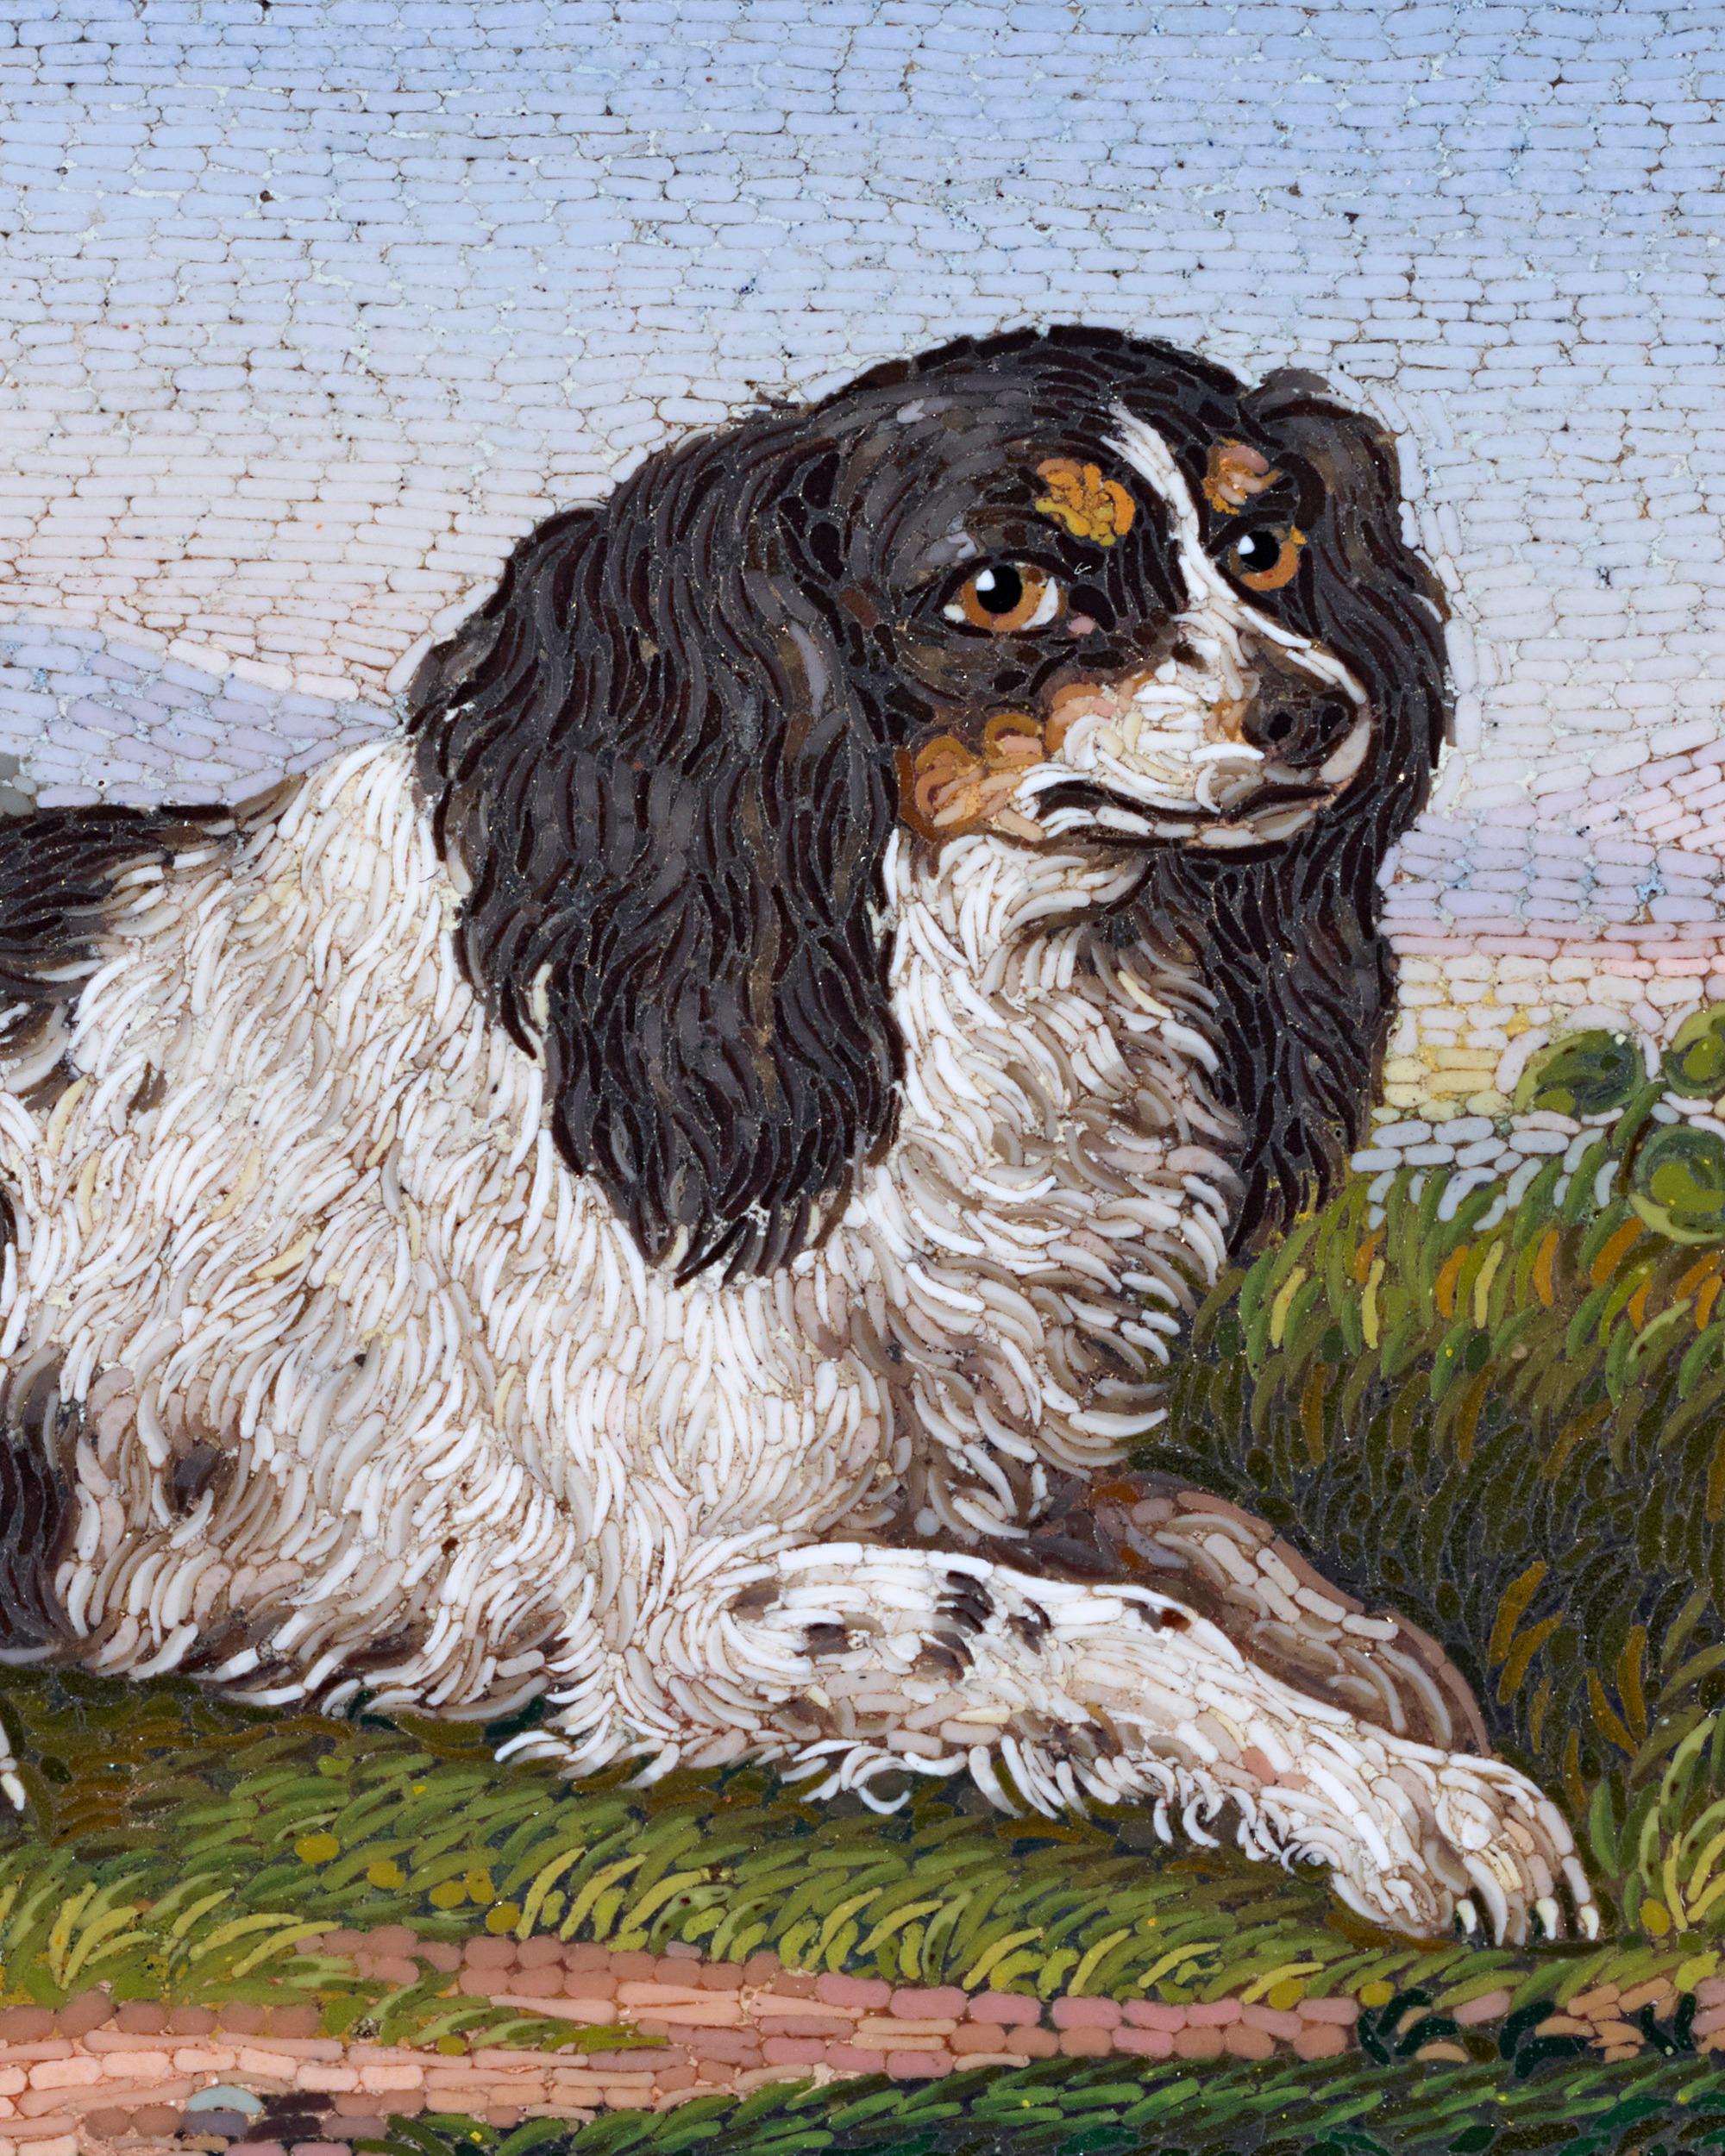 This charming Victorian-era micromosaic brooch is a wonder of meticulous craftsmanship and intricate design. Depicting a friendly Cavalier King Charles Spaniel, it is designed after a micromosaic plaque by Antonio Aguatti that now resides in the